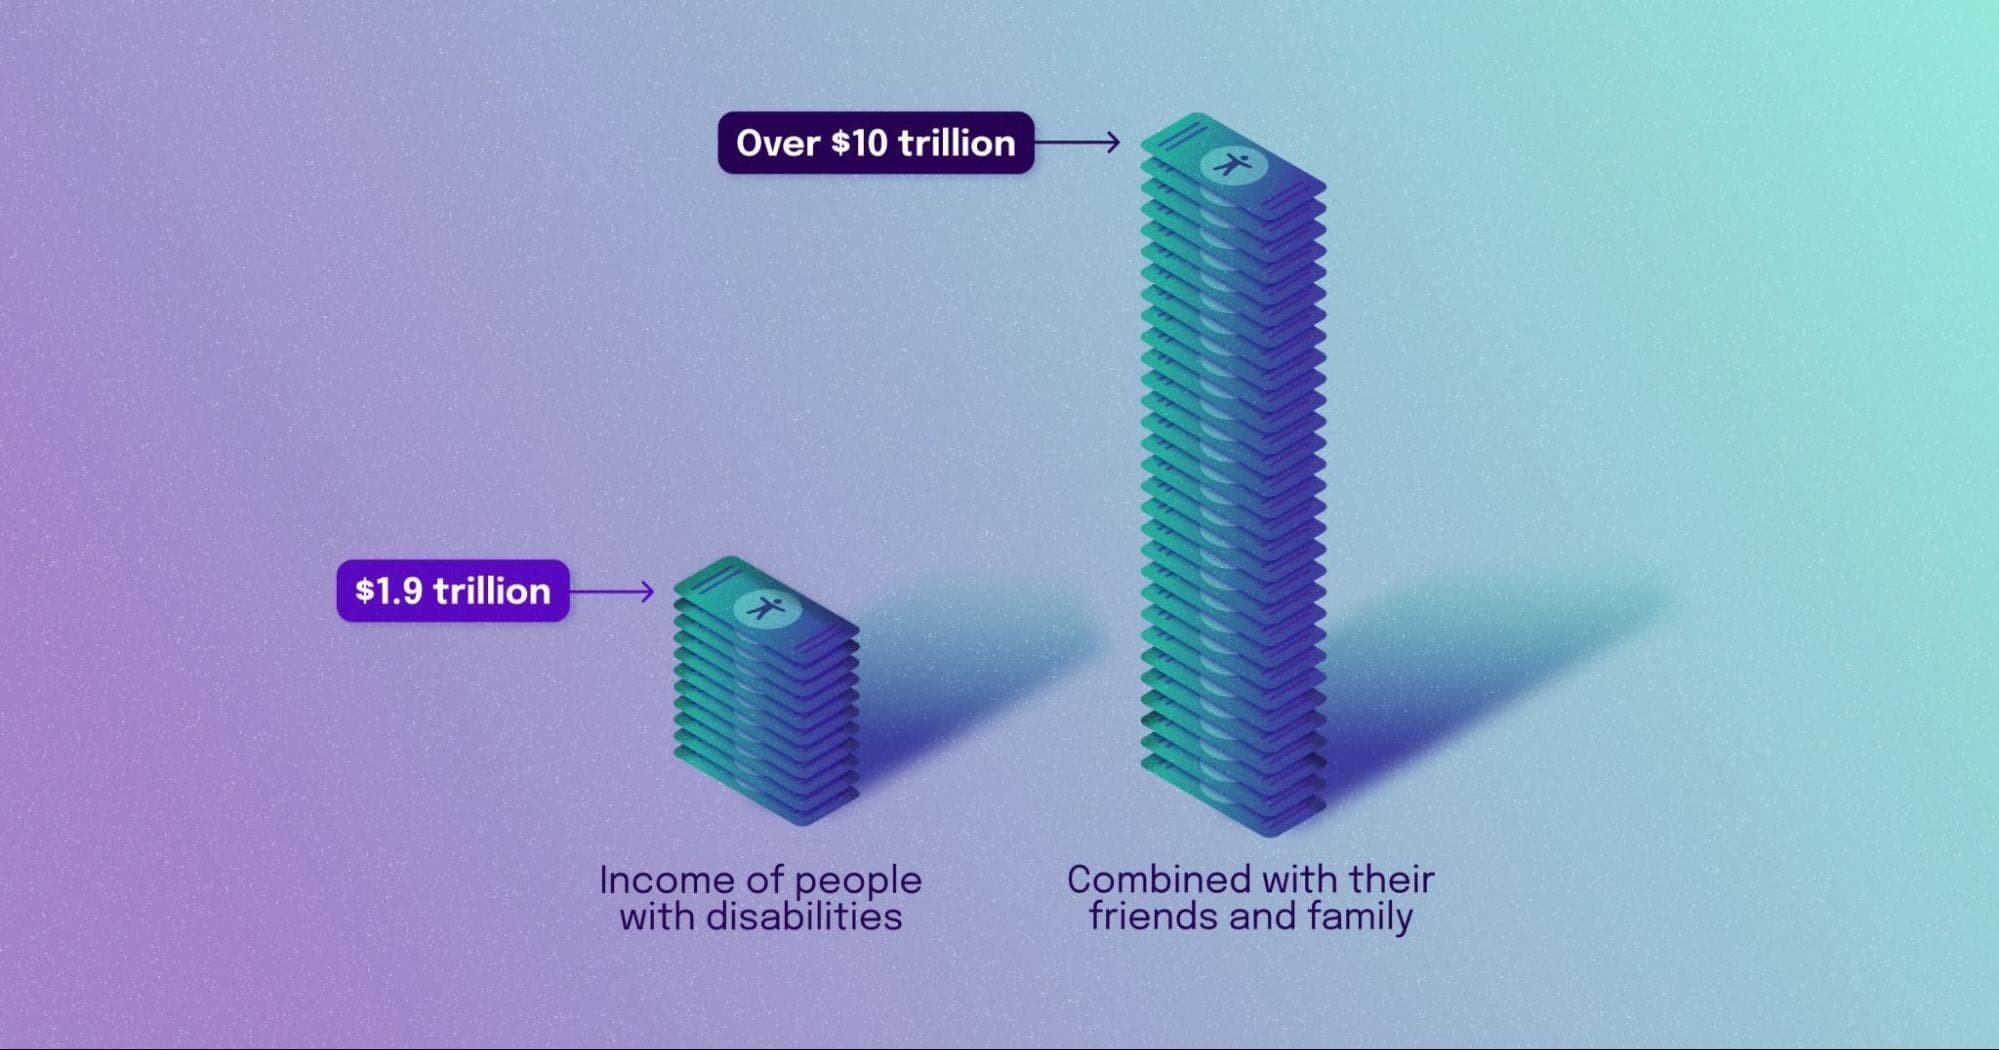 Illustration of two piles of monetary bills. On the left, $1.9 trillion the income of people with disabilities. On the right, over $10 trillion the combined income of their friends and family.